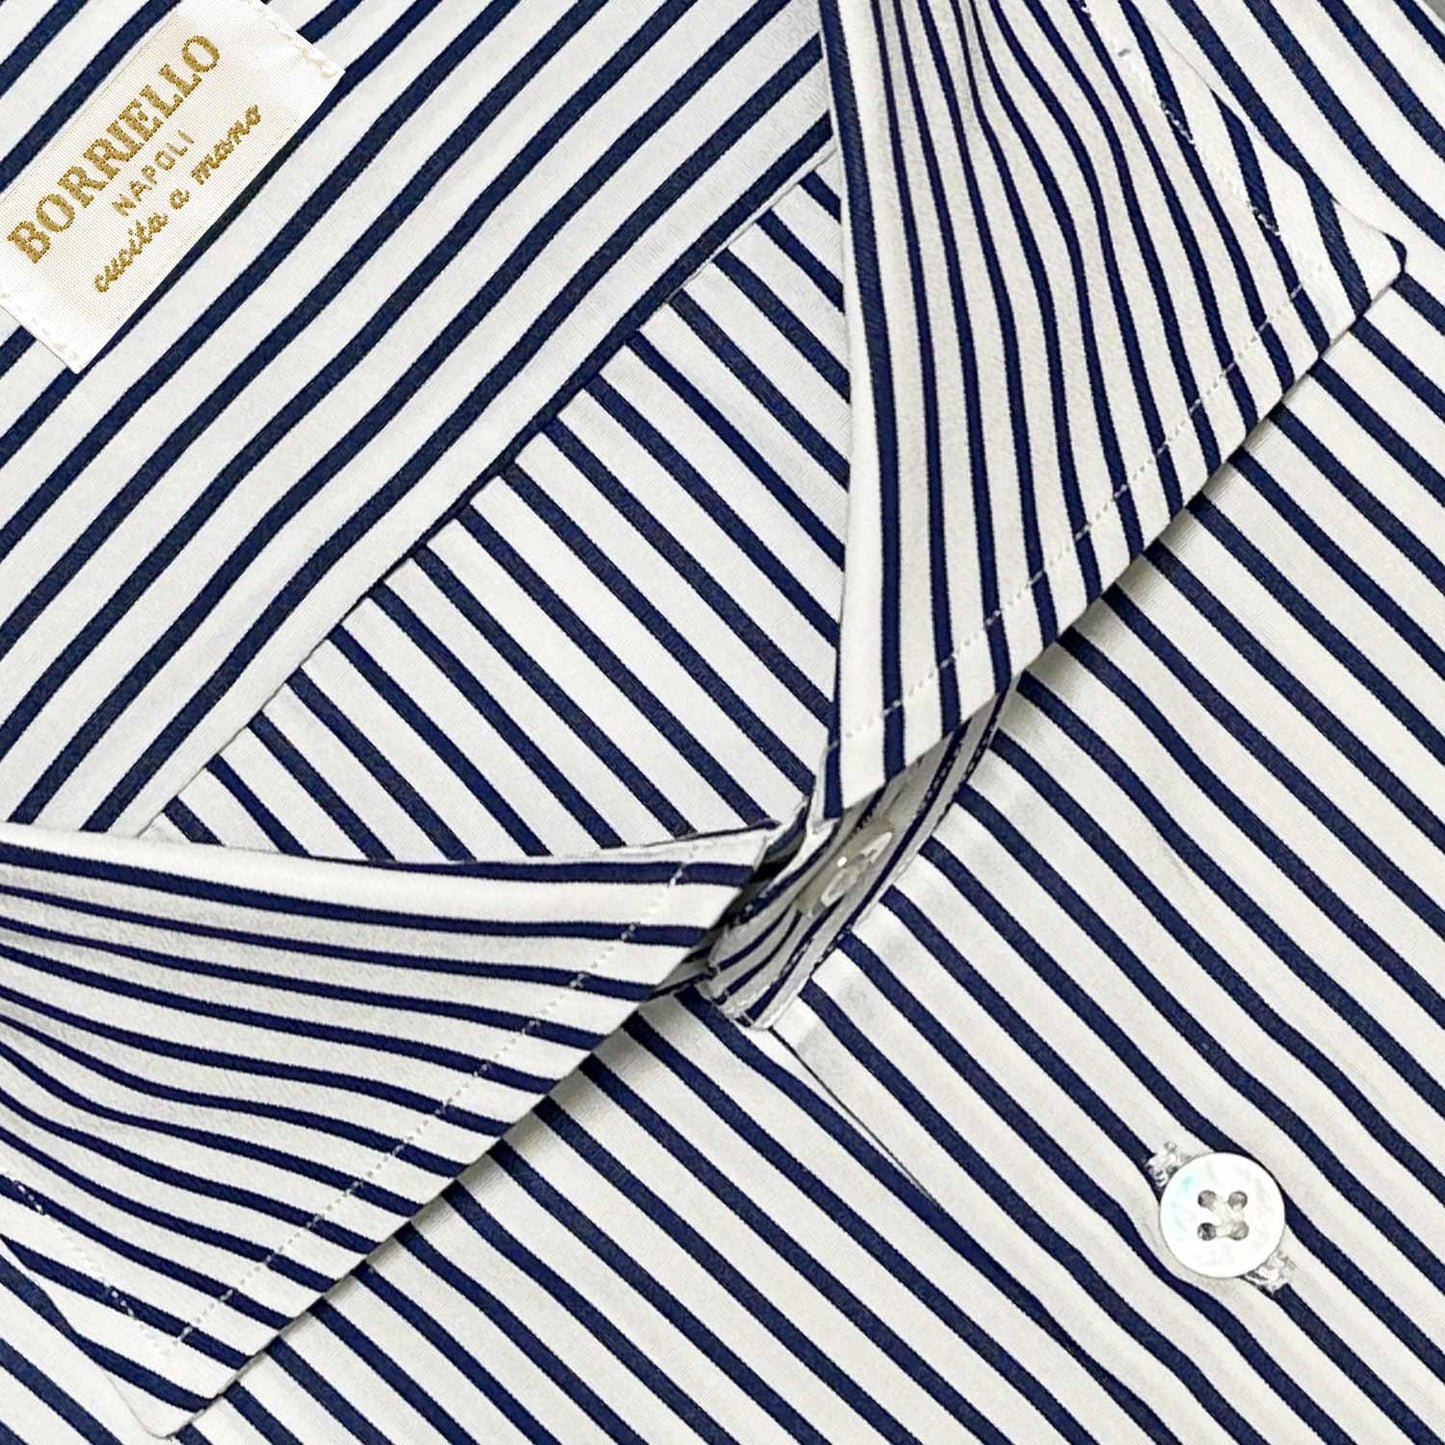 Classic blue striped shirt made with Thomas Mason fabric yarn-dyed in popeline cotton. Handmade shirt by Borriello Napoli exclusive for Wools Boutique Uomo, ideal both for the office and for more formal occasions with a bright appearance and a soft and smooth hand.